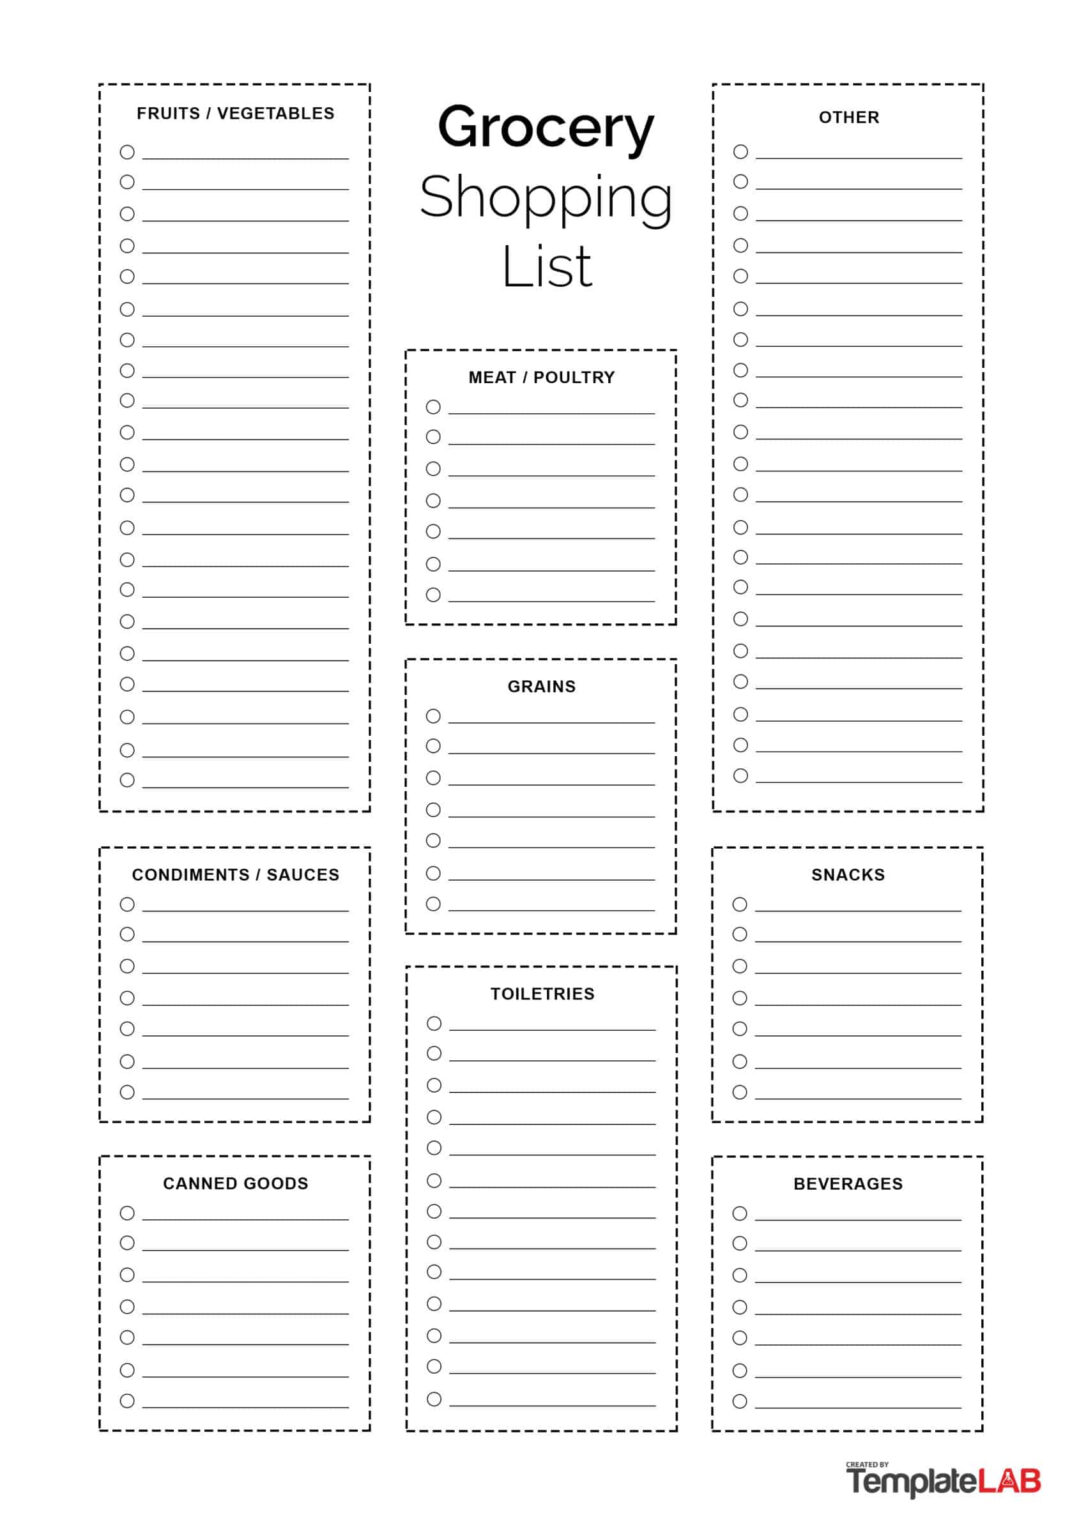 download-grocery-list-template-11-printable-grocery-list-template